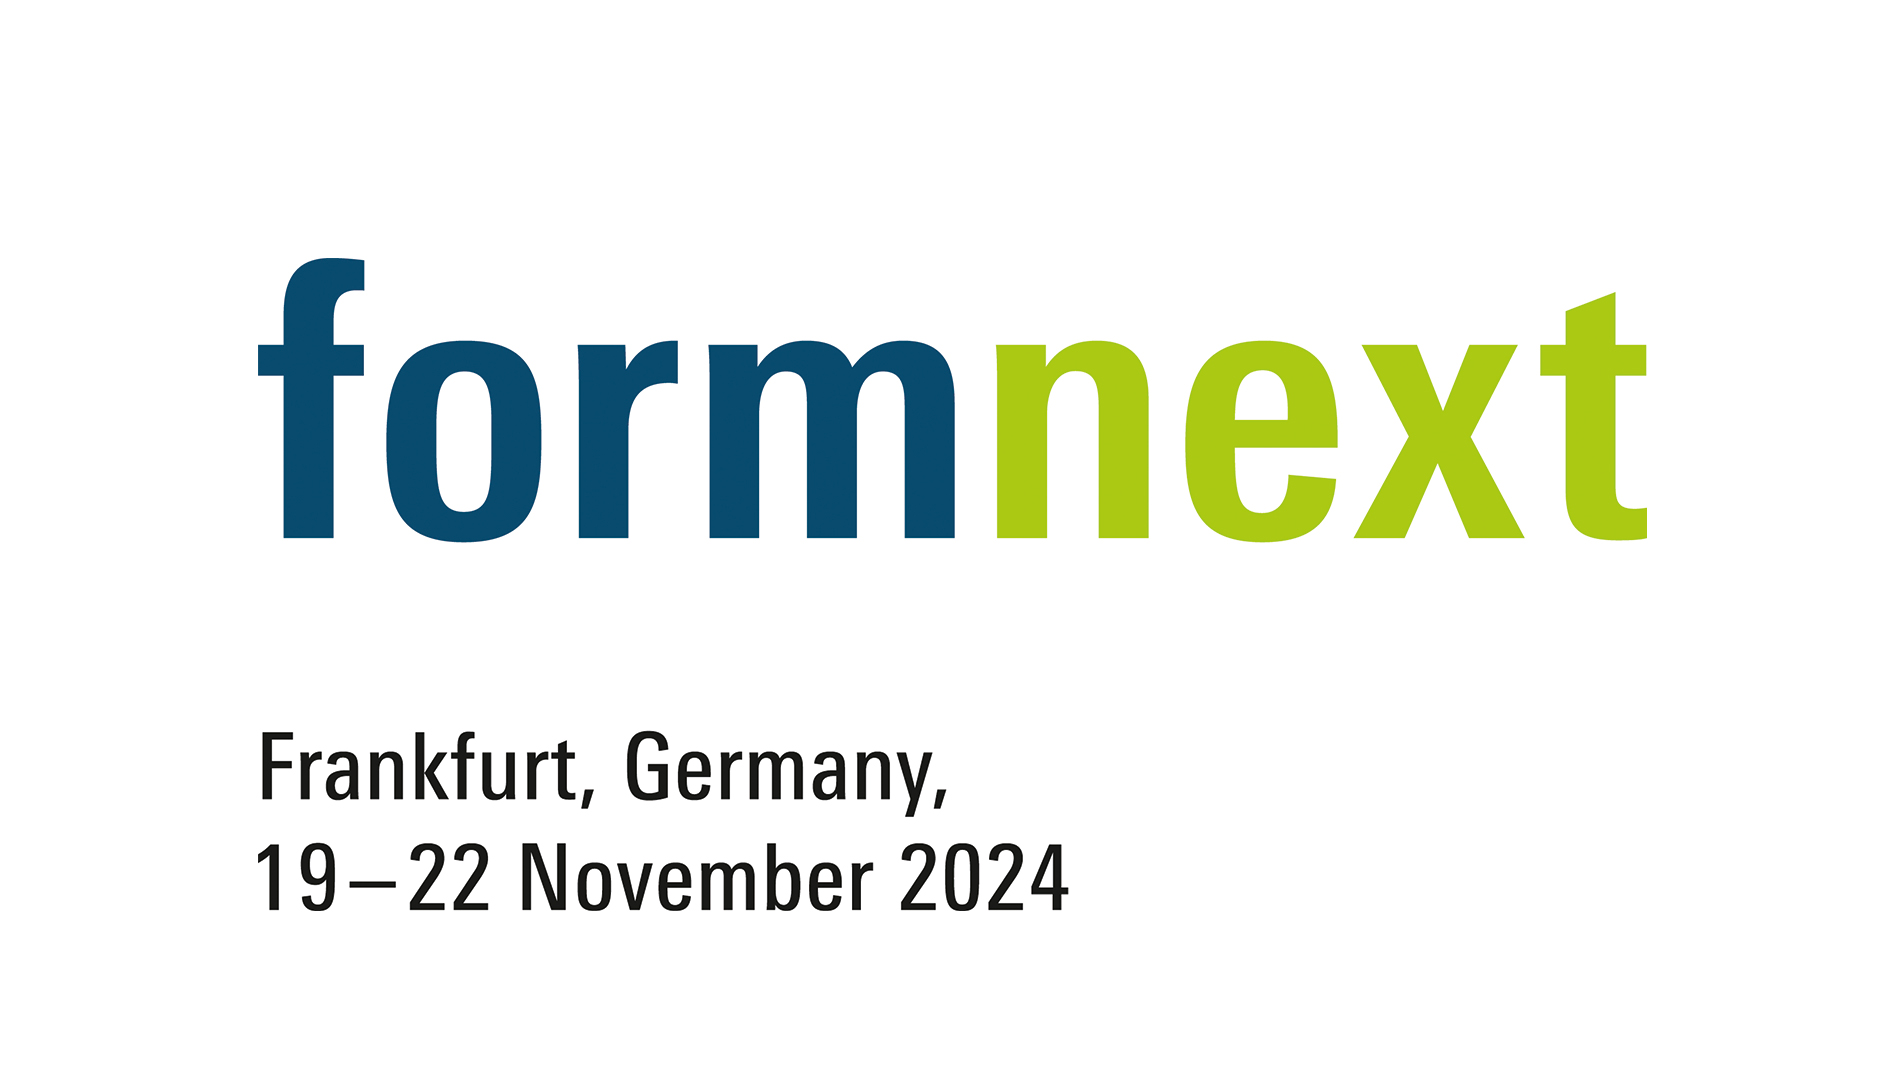 Formnext logo package place and date, English